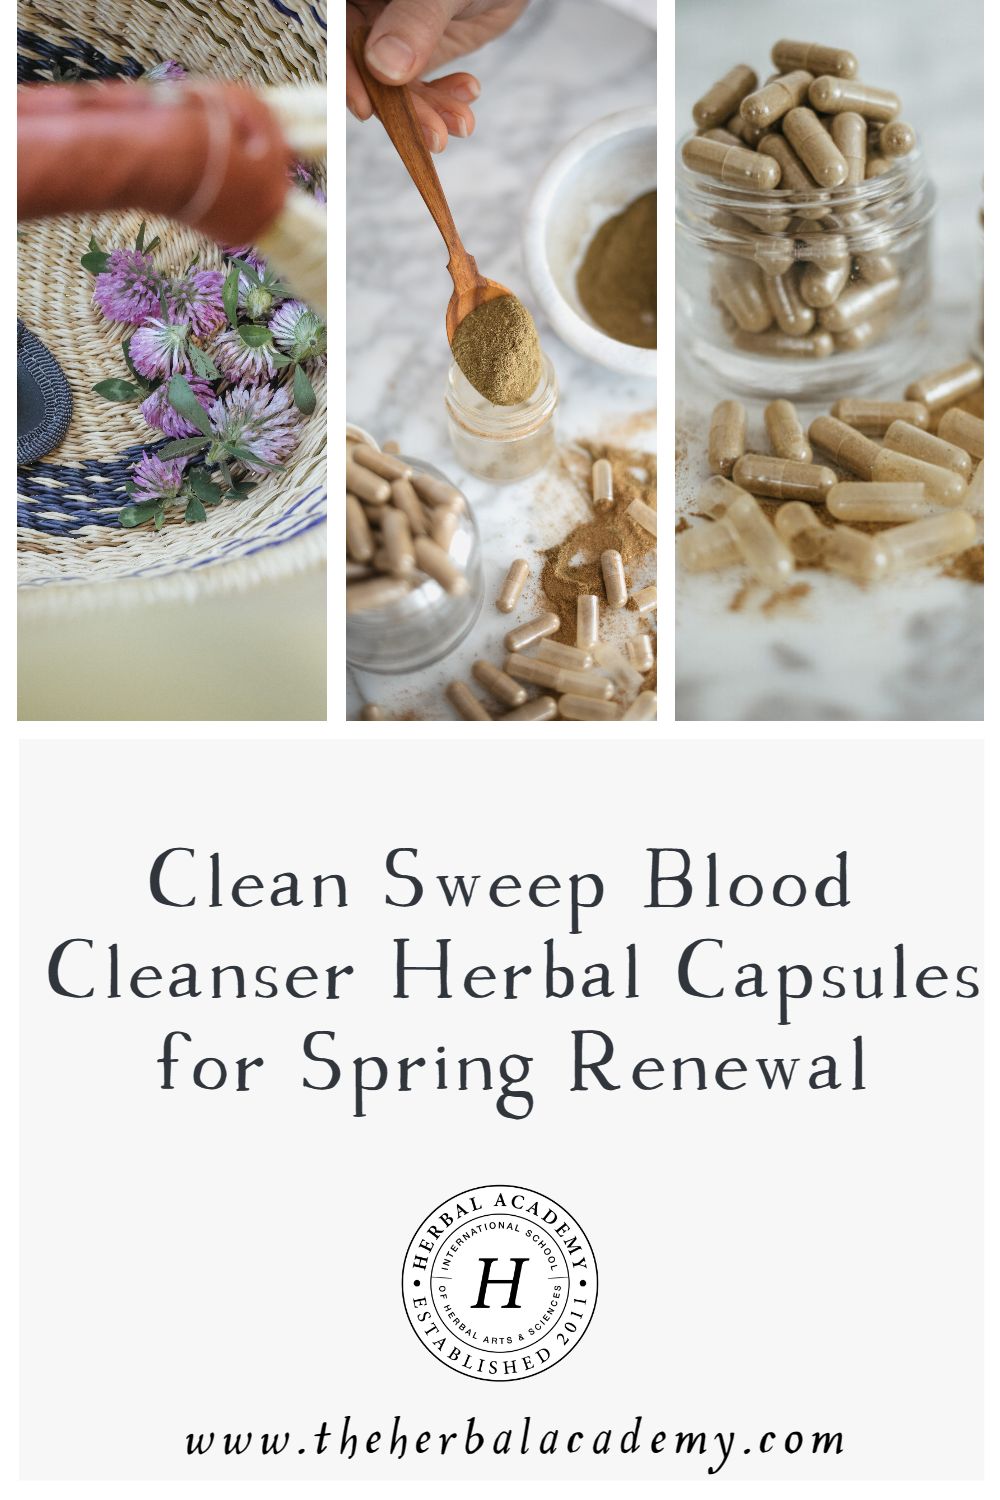 Clean Sweep Blood Cleanser Herbal Capsules for Spring Renewal | Herbal Academy | Shed your winter heaviness with our herbal capsules recipe using alterative herbs! It will help you gently cleanse and refresh during spring.